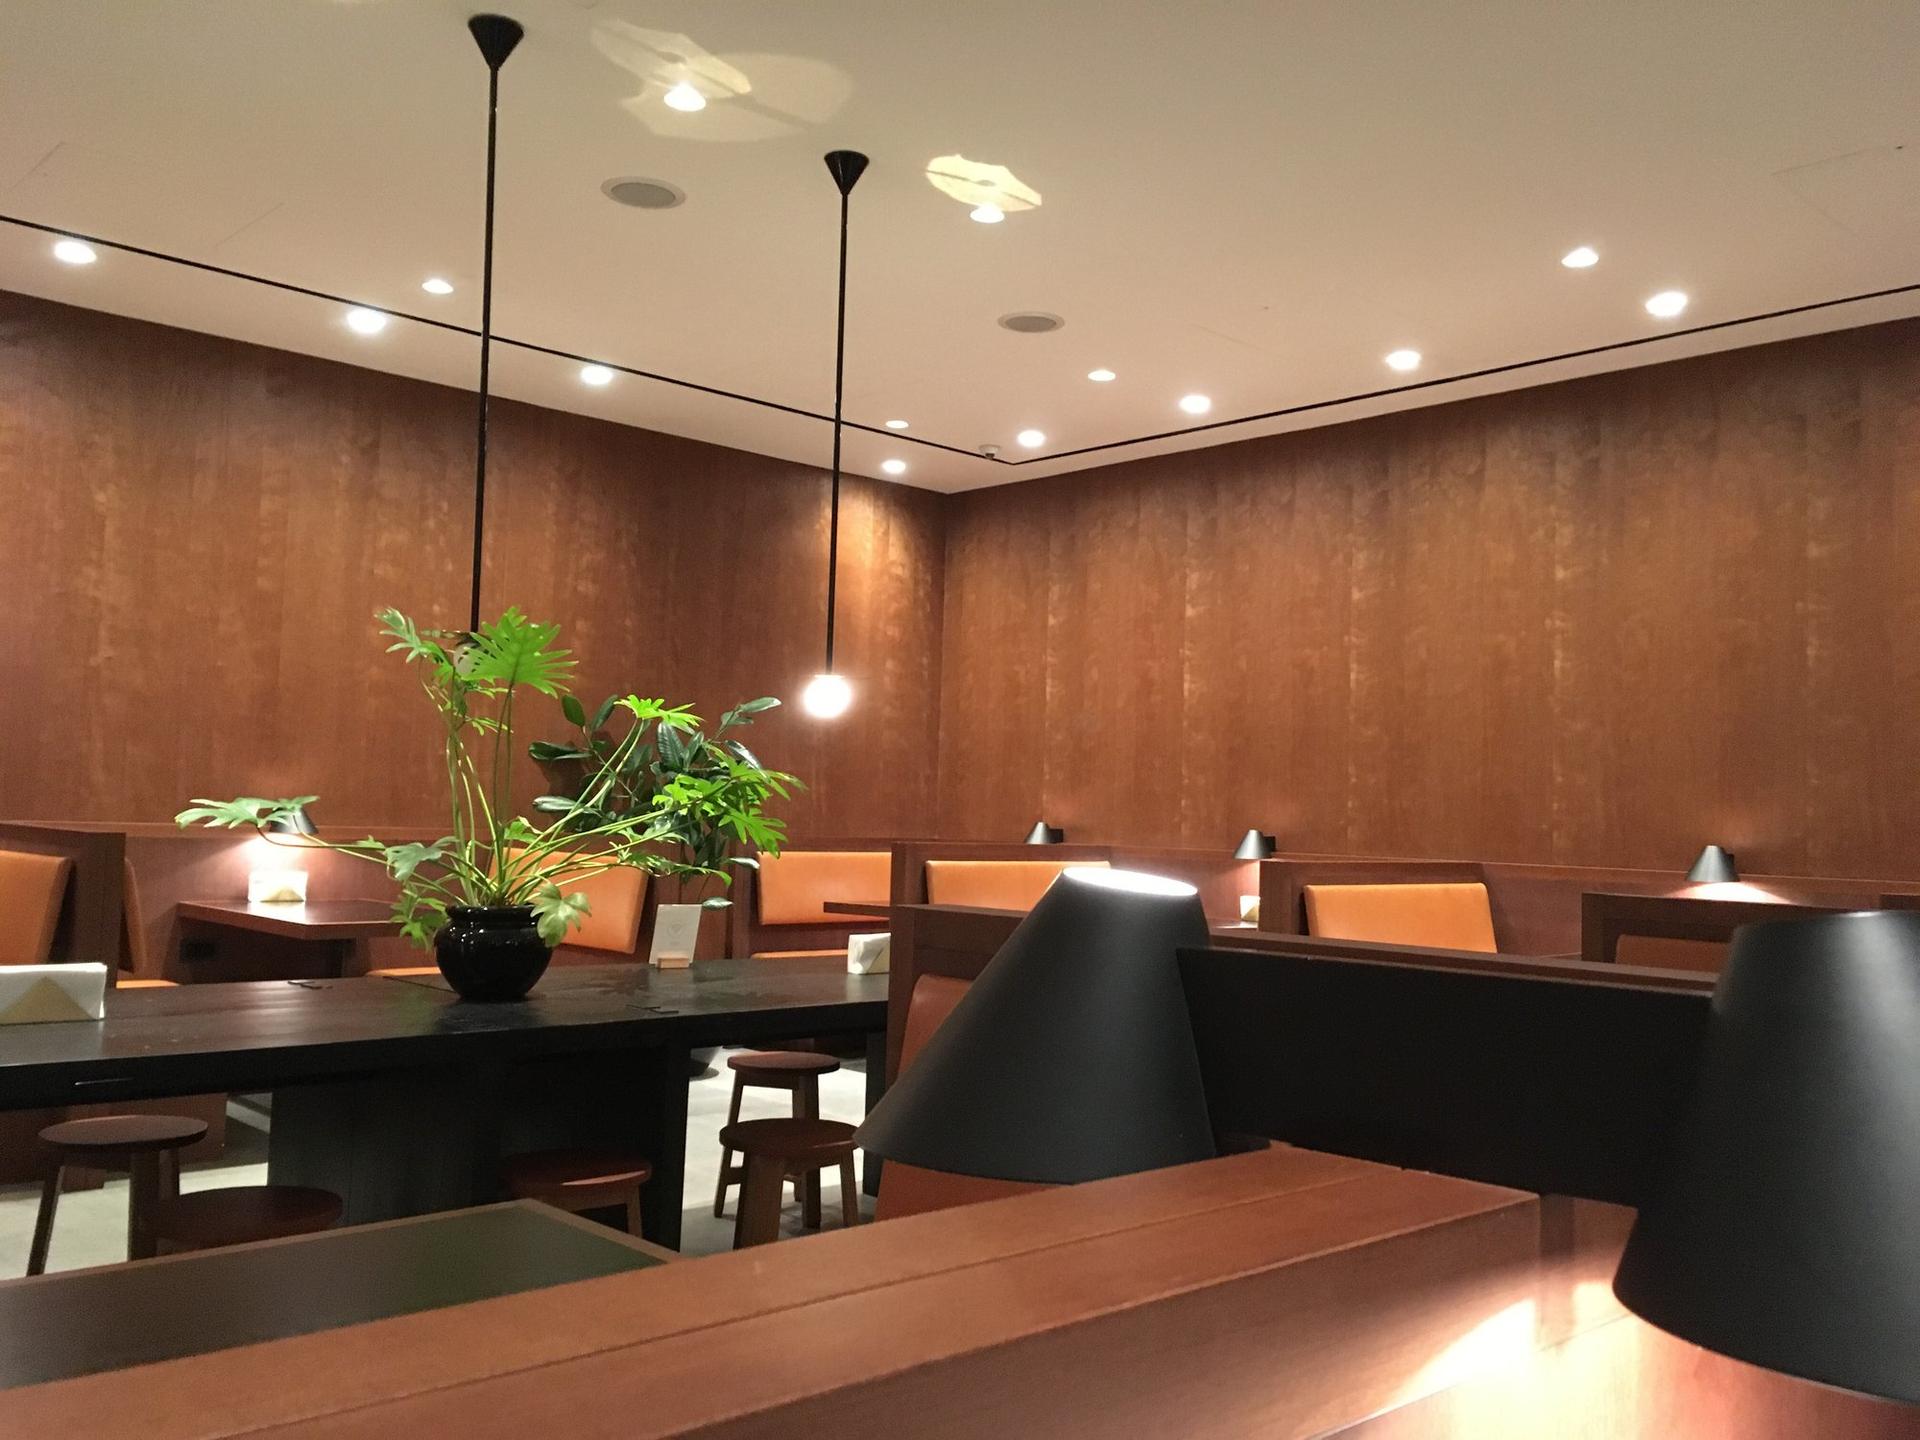 Cathay Pacific Business Class Lounge image 14 of 48